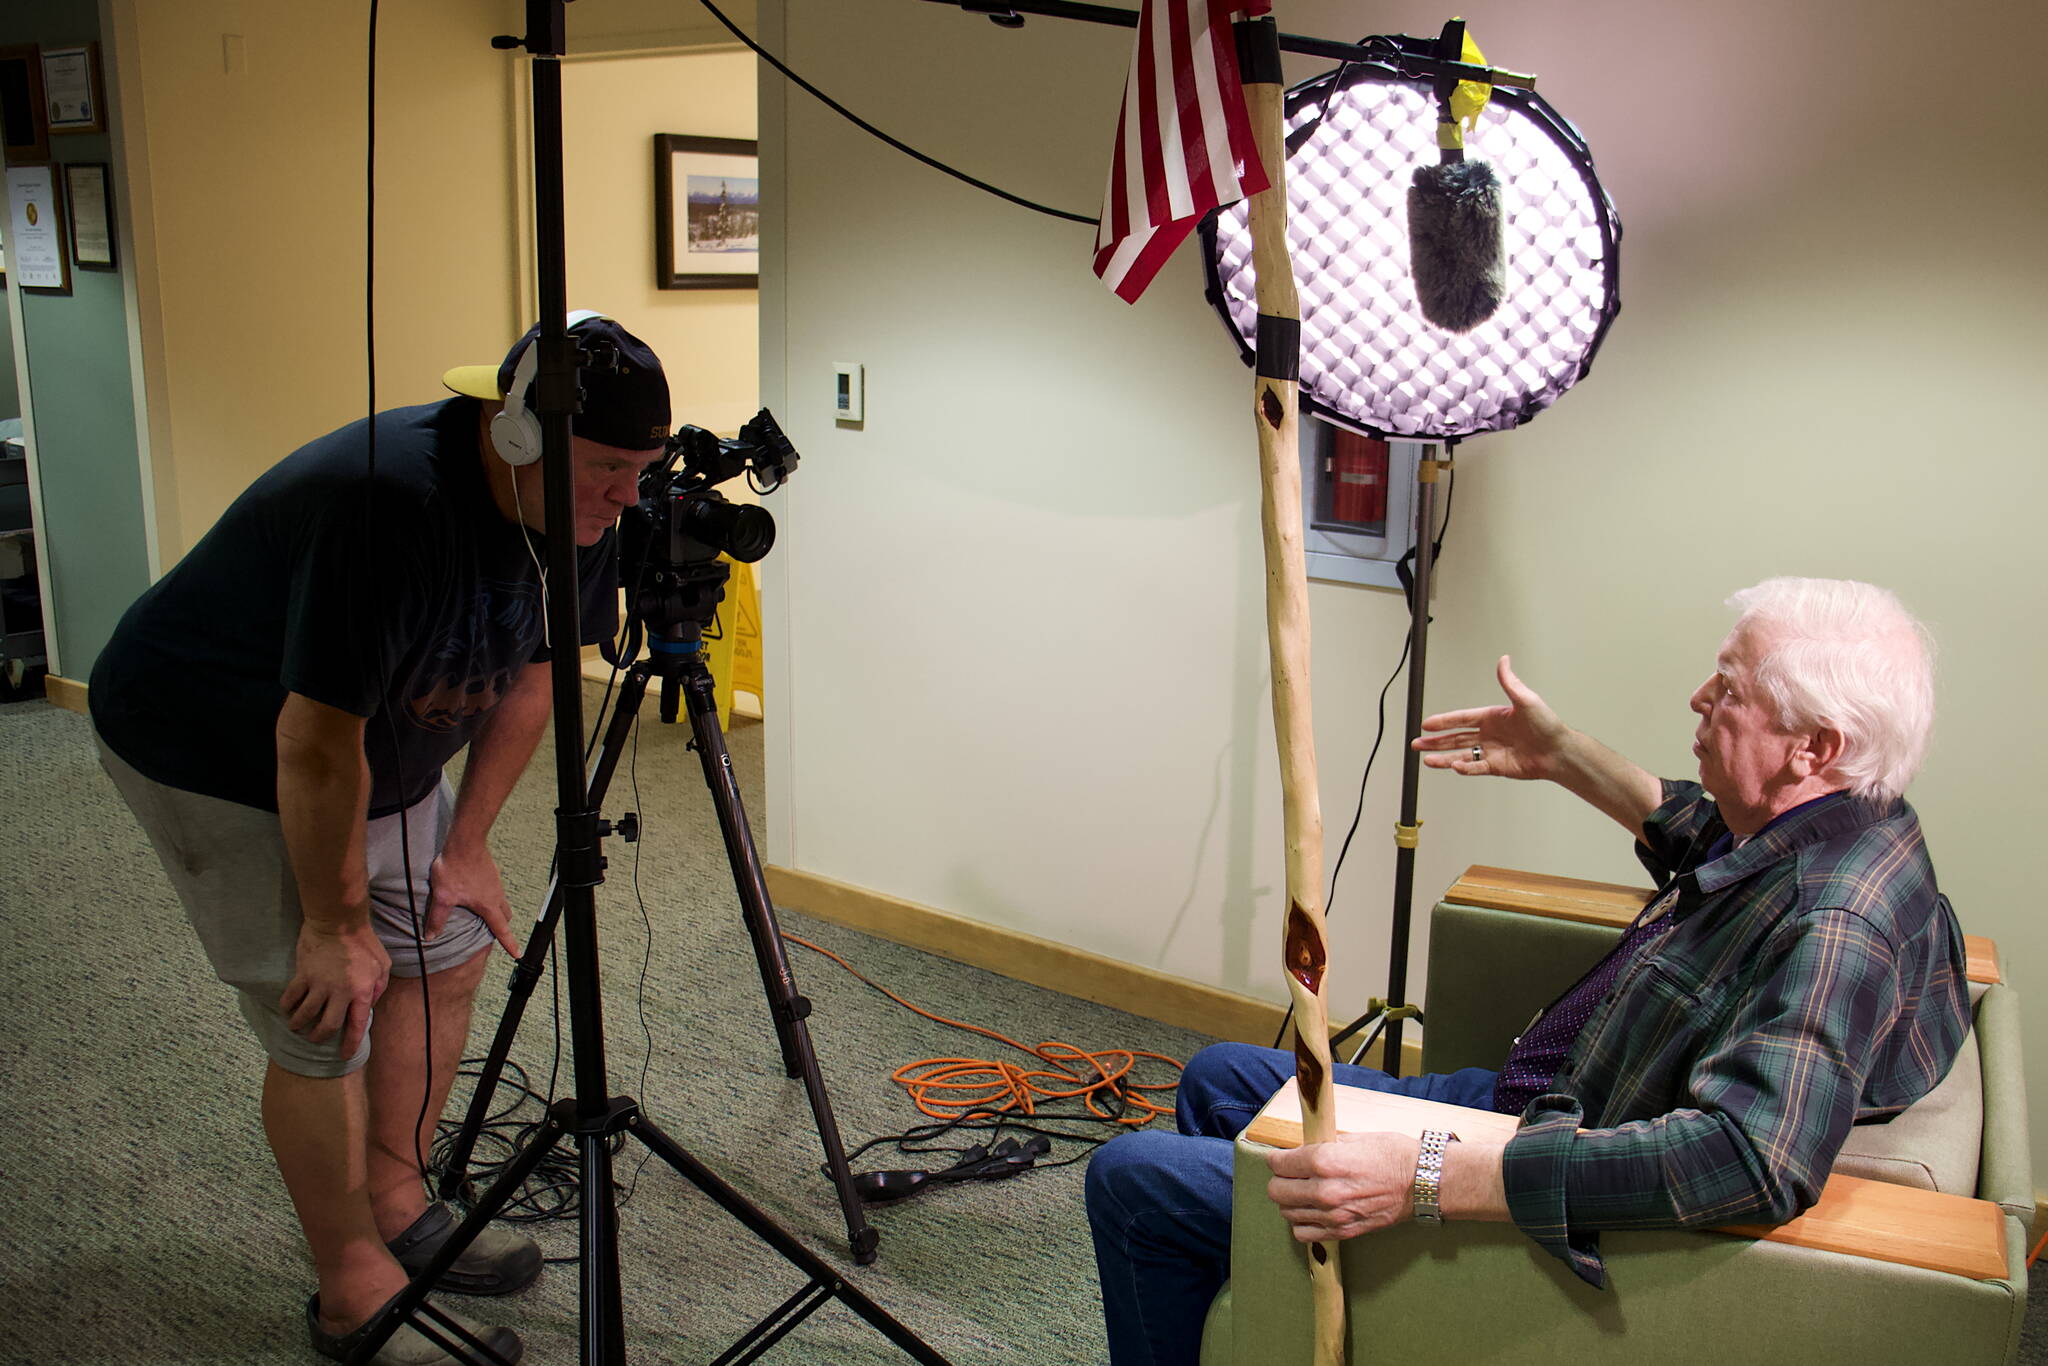 Jerry Adams (right) discusses what being a hospice and home care volunteer means to him while being filmed by Gabe Strong in a pop-up video booth in a hallway at Bartlett Regional Hospital. The filming, where people offering and receiving such services were invited to participate, was part a celebration of the hospital resuming hospice and home care services after they were discontinued by Catholic Community Service last fall. (Mark Sabbatini / Juneau Empire)